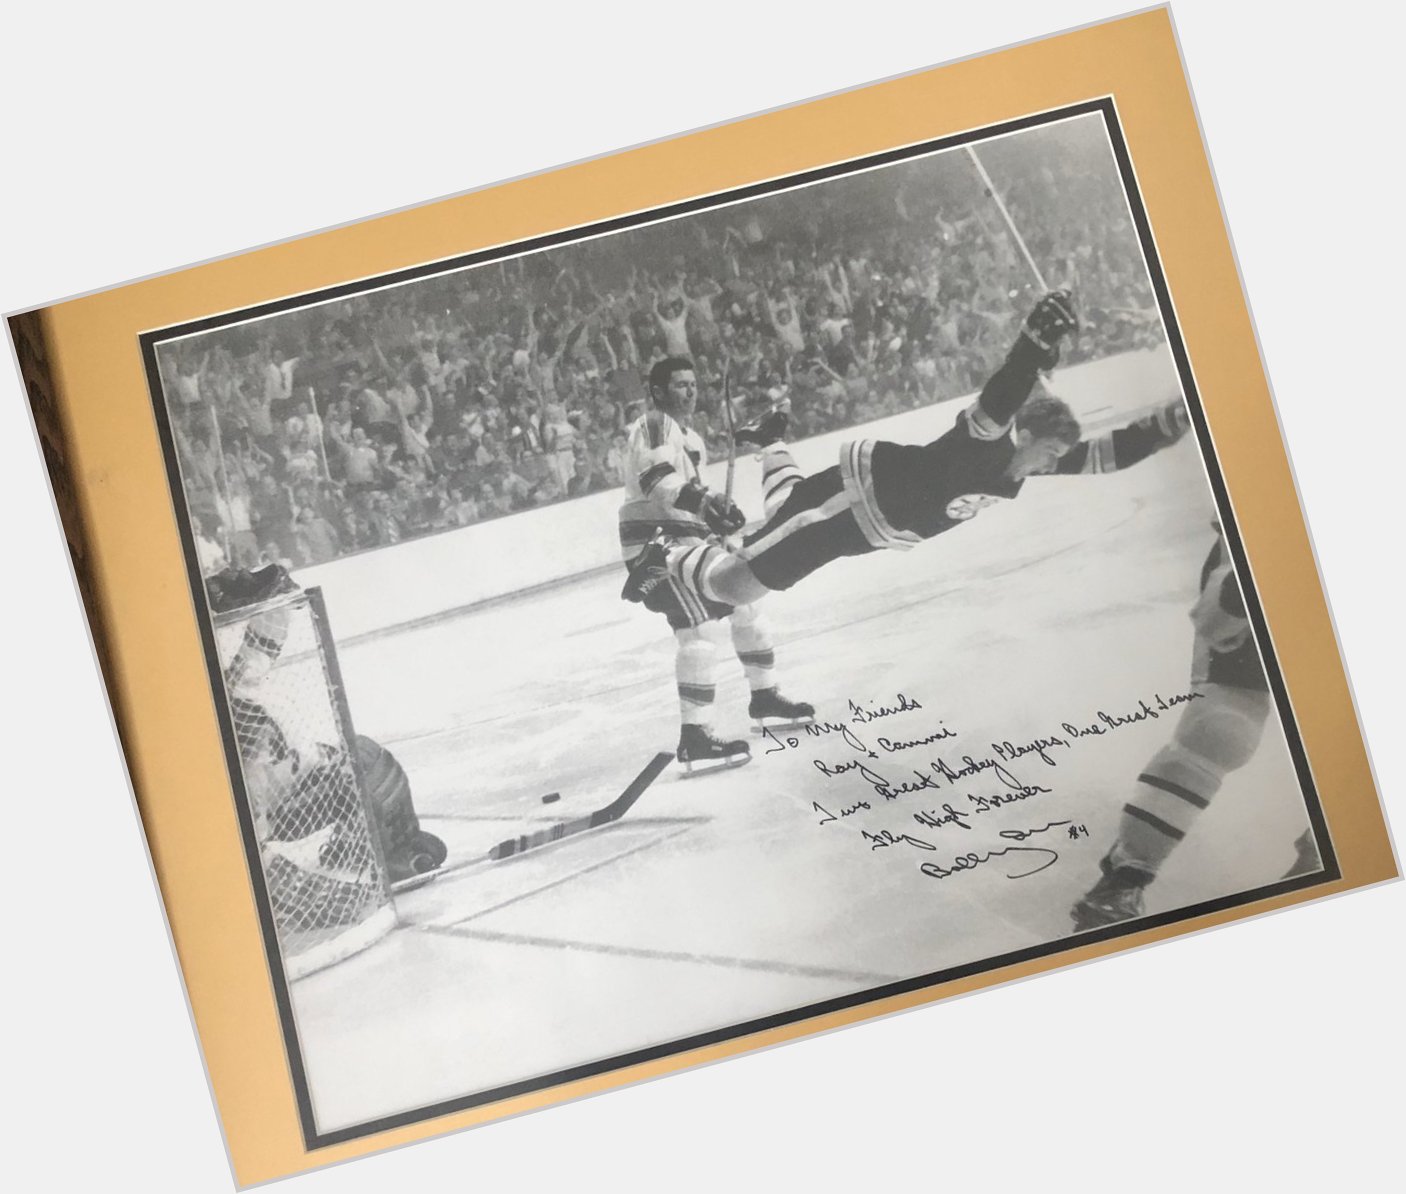 Happy 72nd birthday to the incomparable Bobby Orr. Thanks for the wedding gift 15 years ago 